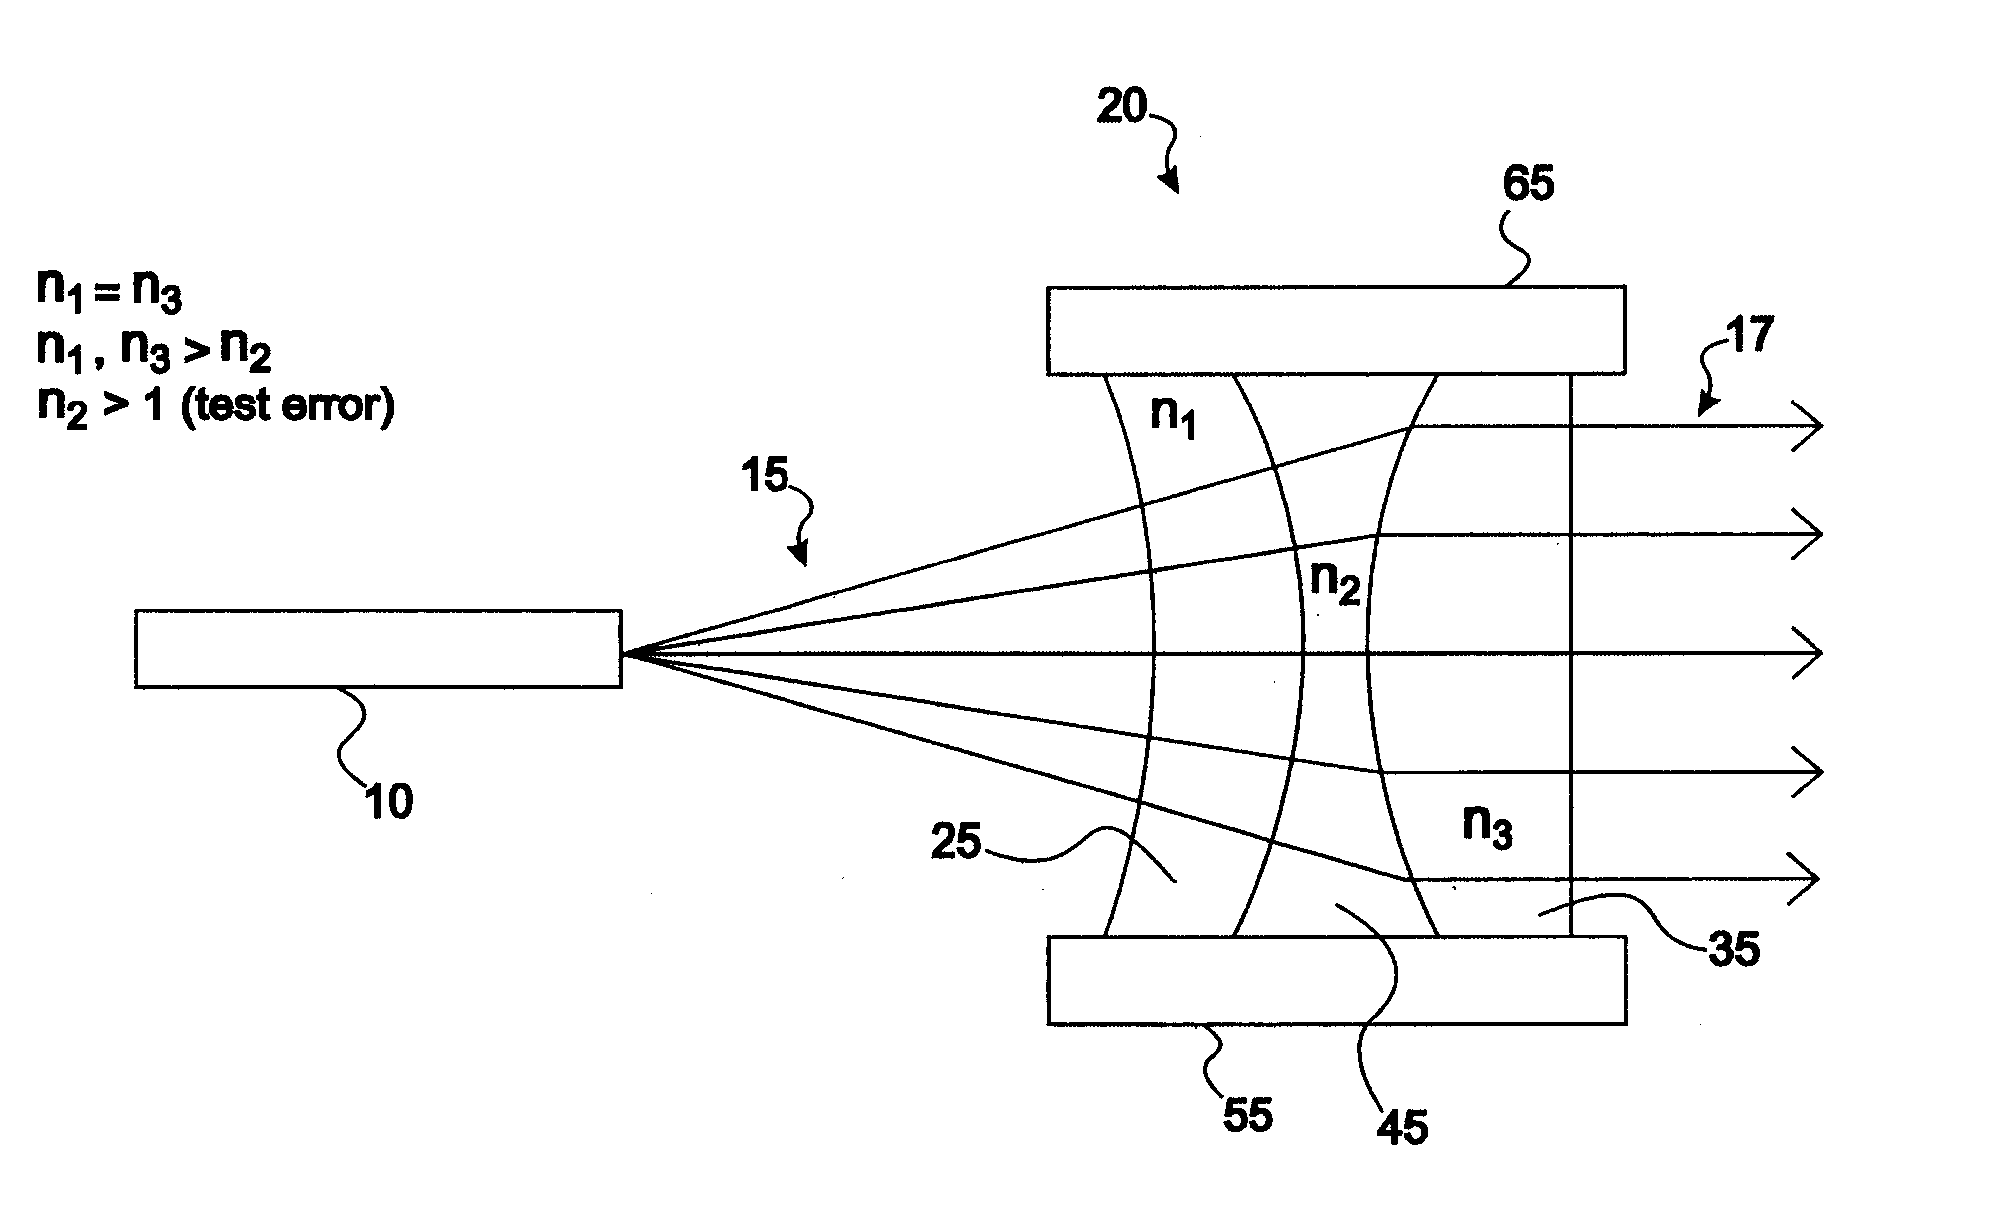 Lens correction element, system and method